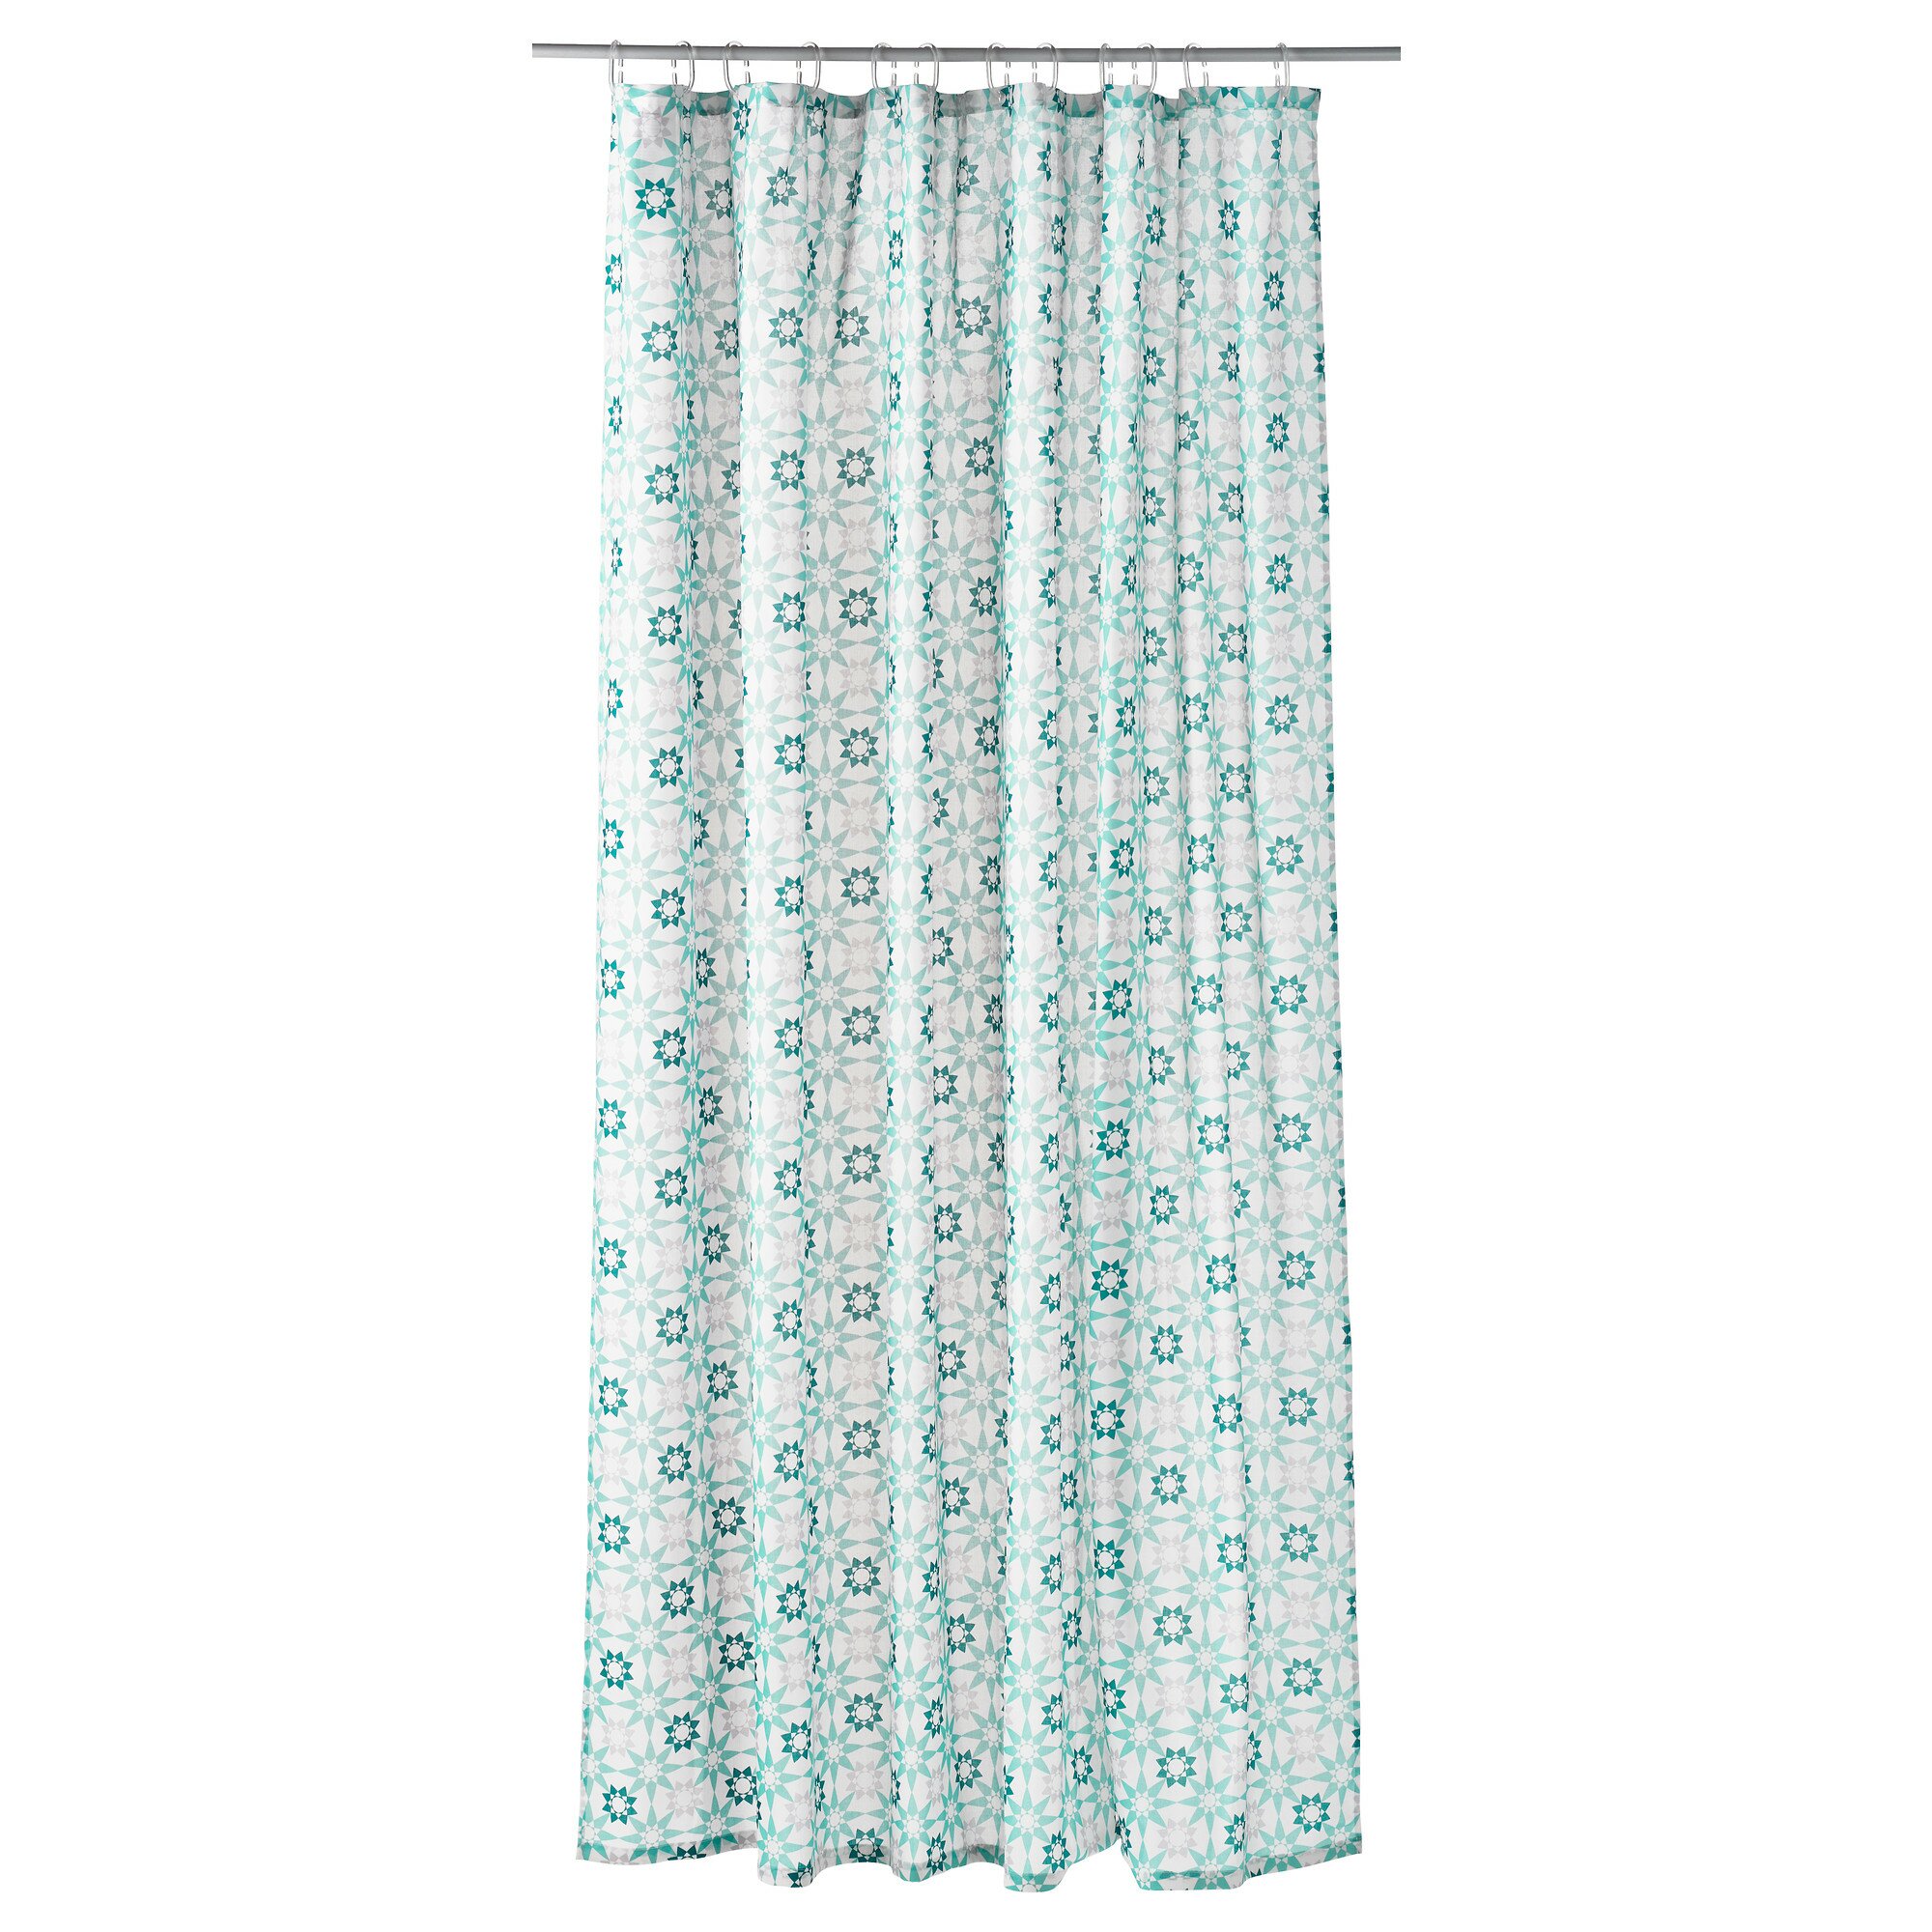 Ikea Shower Curtain for Best Your Bathroom Decoration: Ikea Shower Curtain | Shower Curtains Cheap | Shower Curtain With Liner